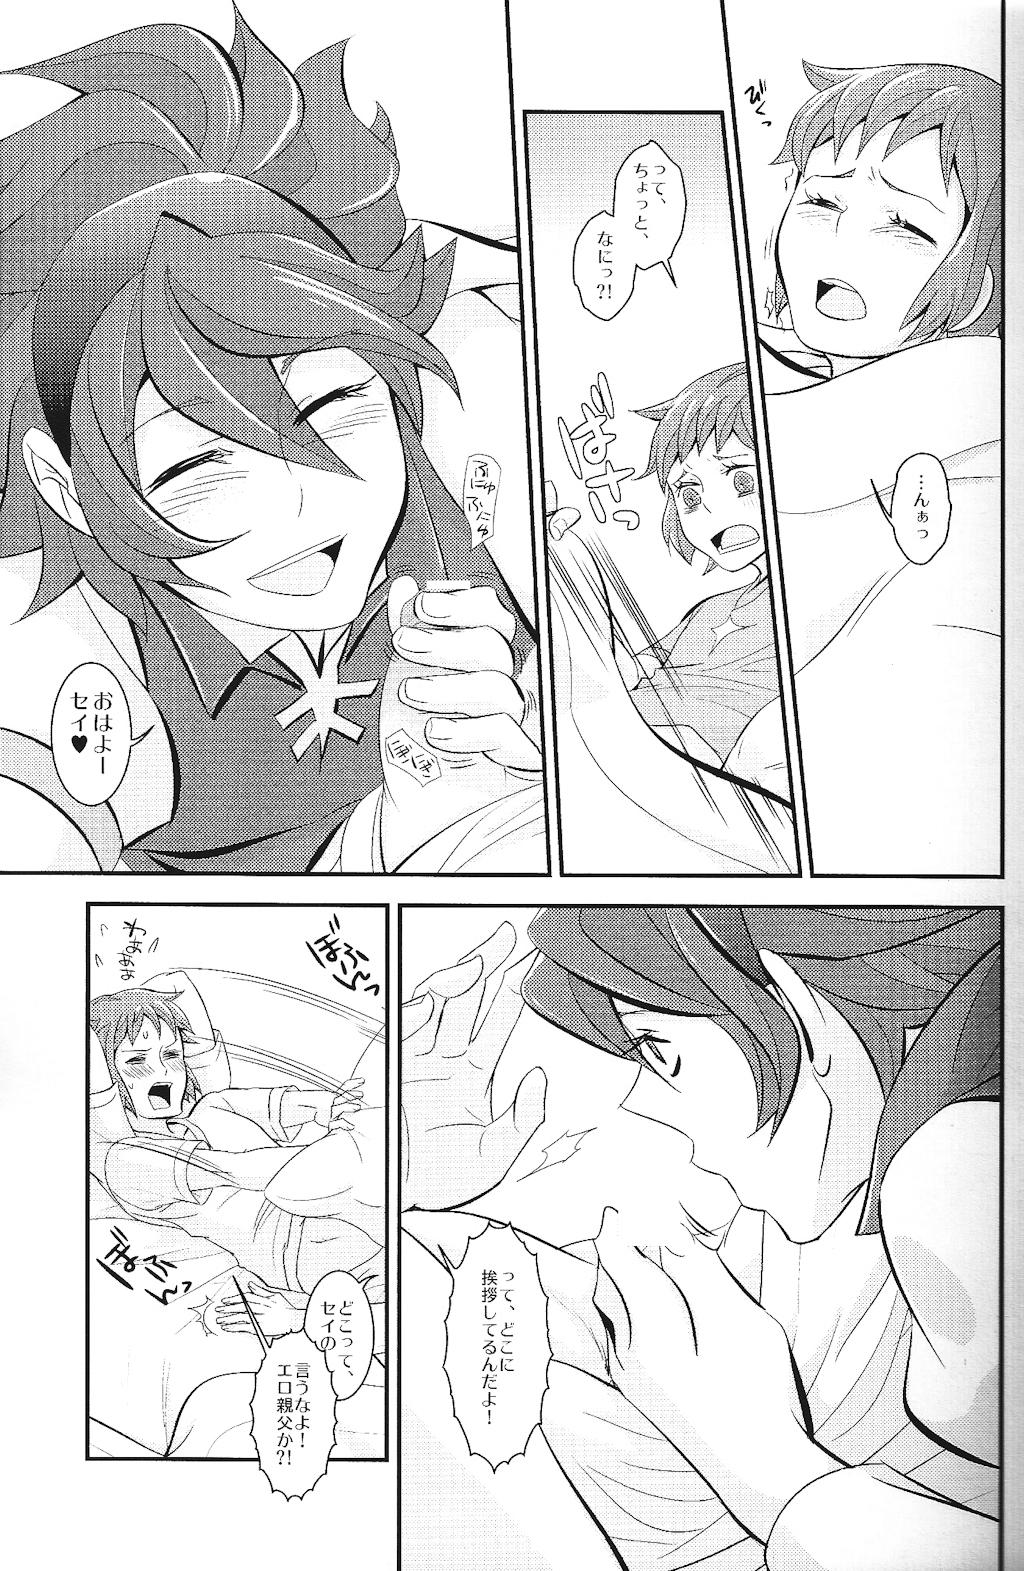 Kashima Date, ore no mono - Gundam build fighters Camshow - Page 4